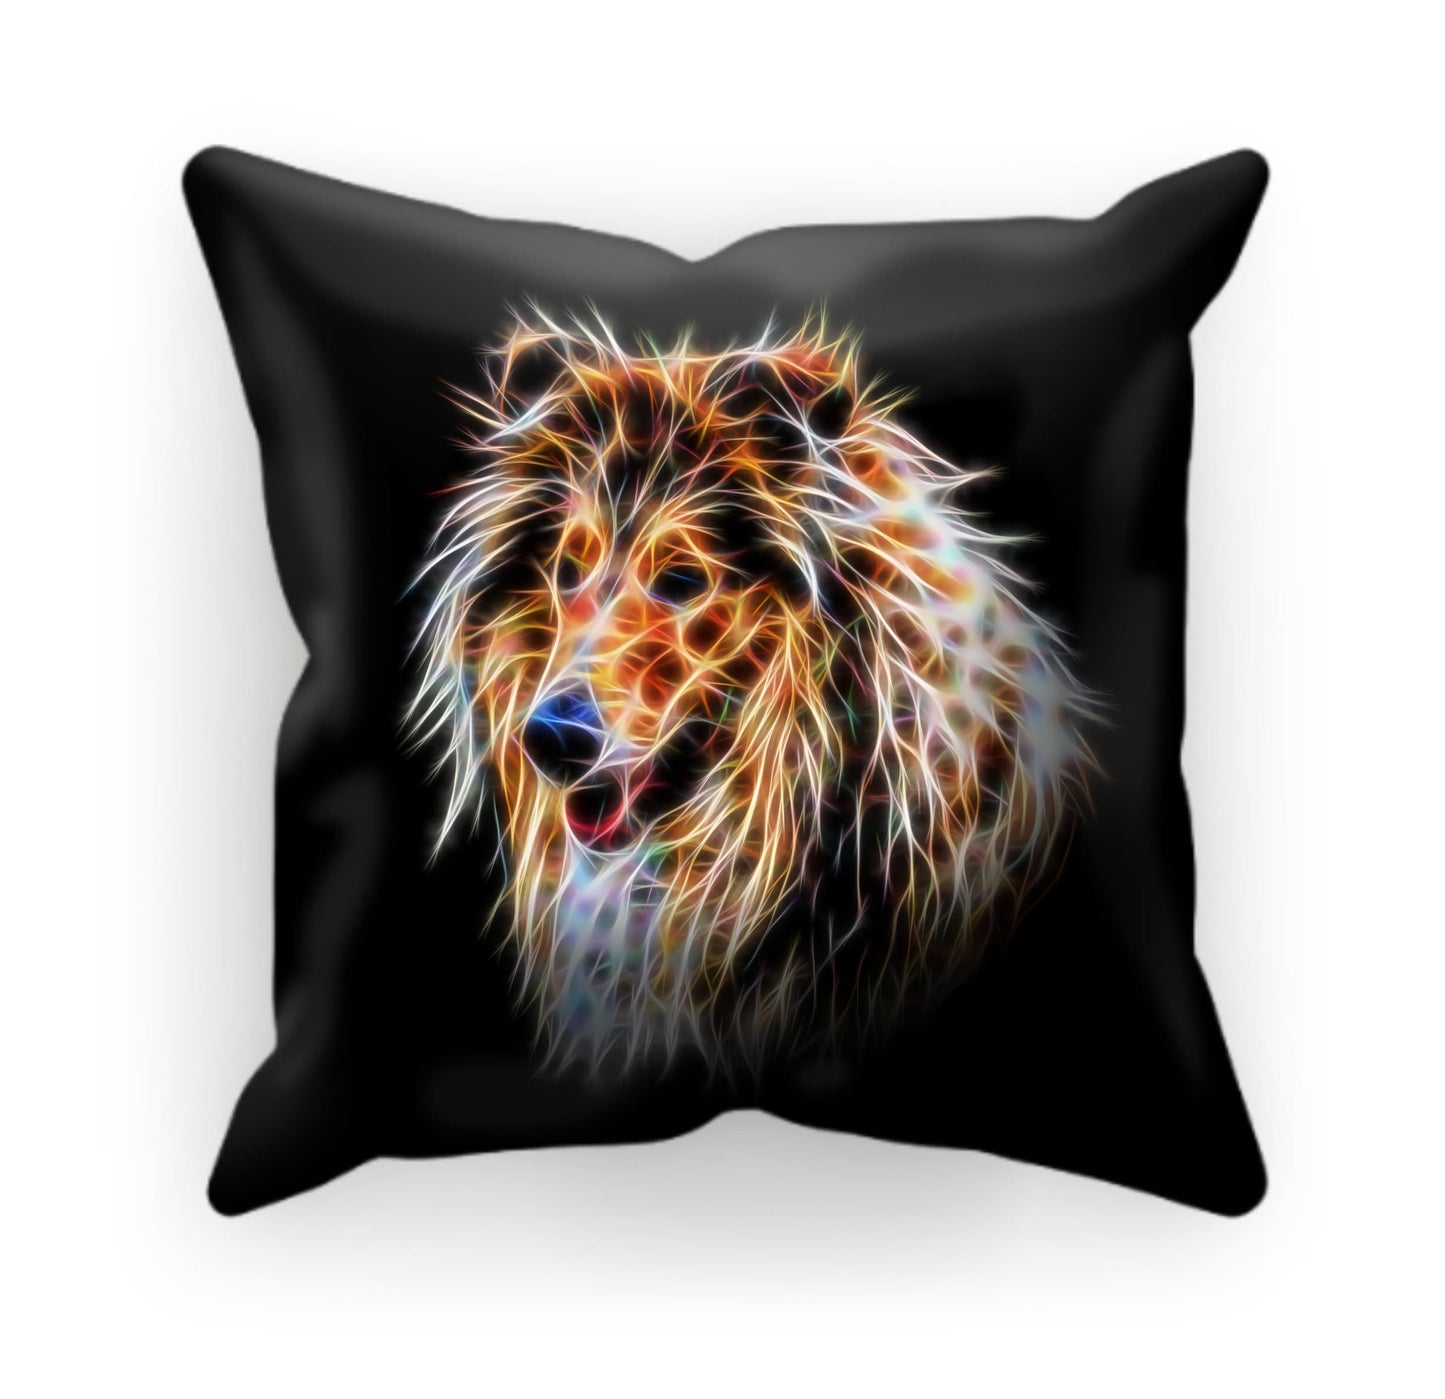 Rough Collie Cushion and Insert with Stunning Fractal Art Design